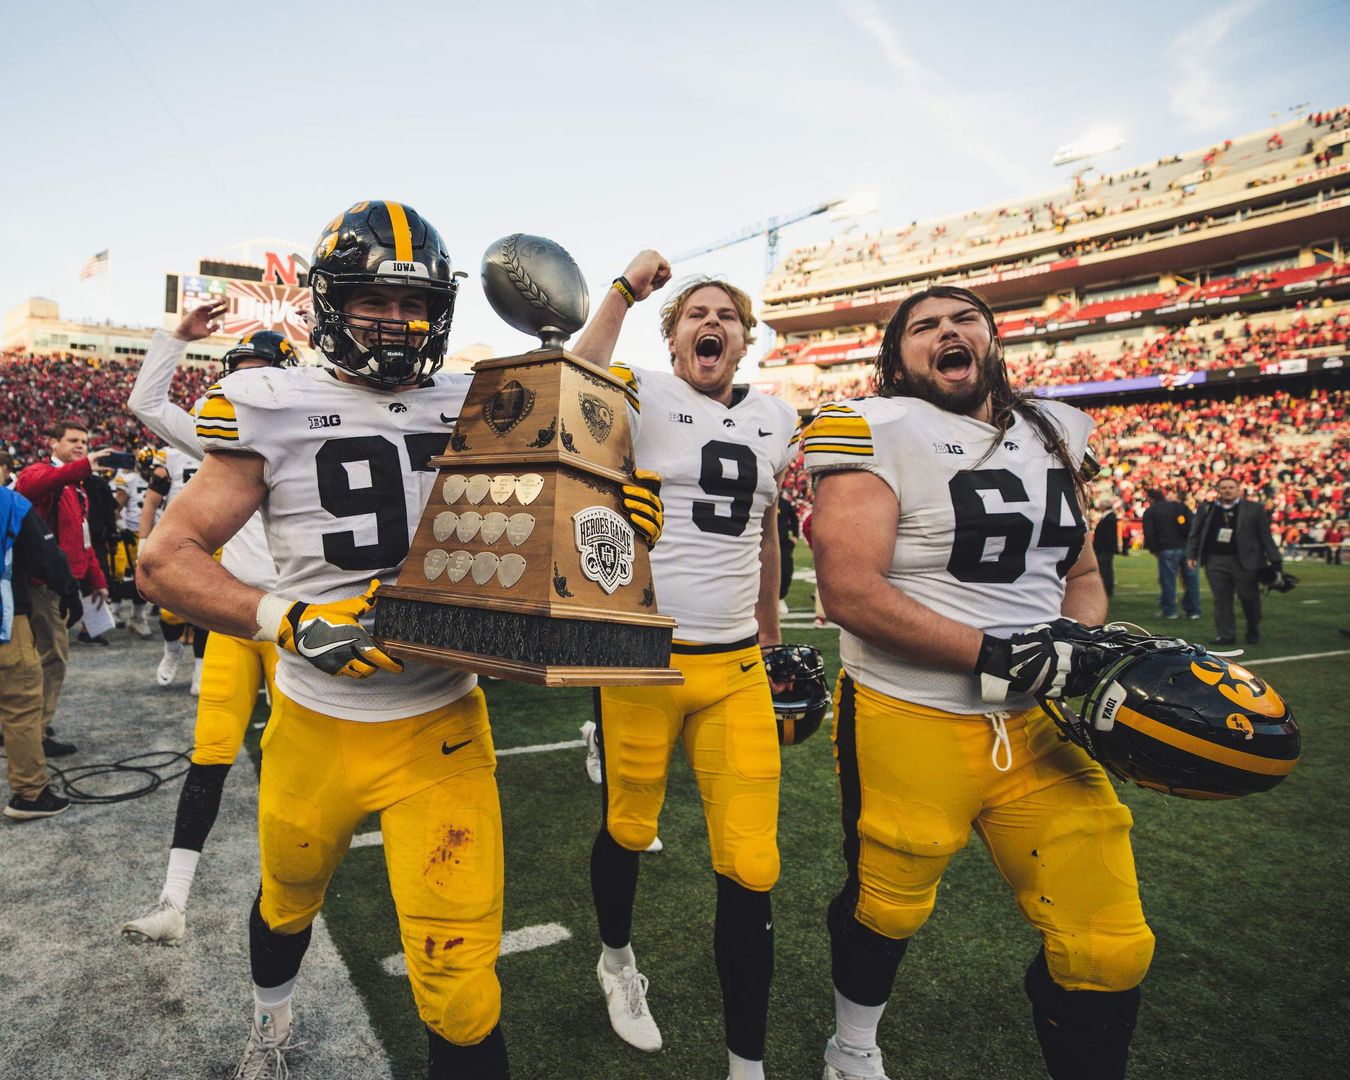 Fan Guide to the Big Ten Football Championship Game University of